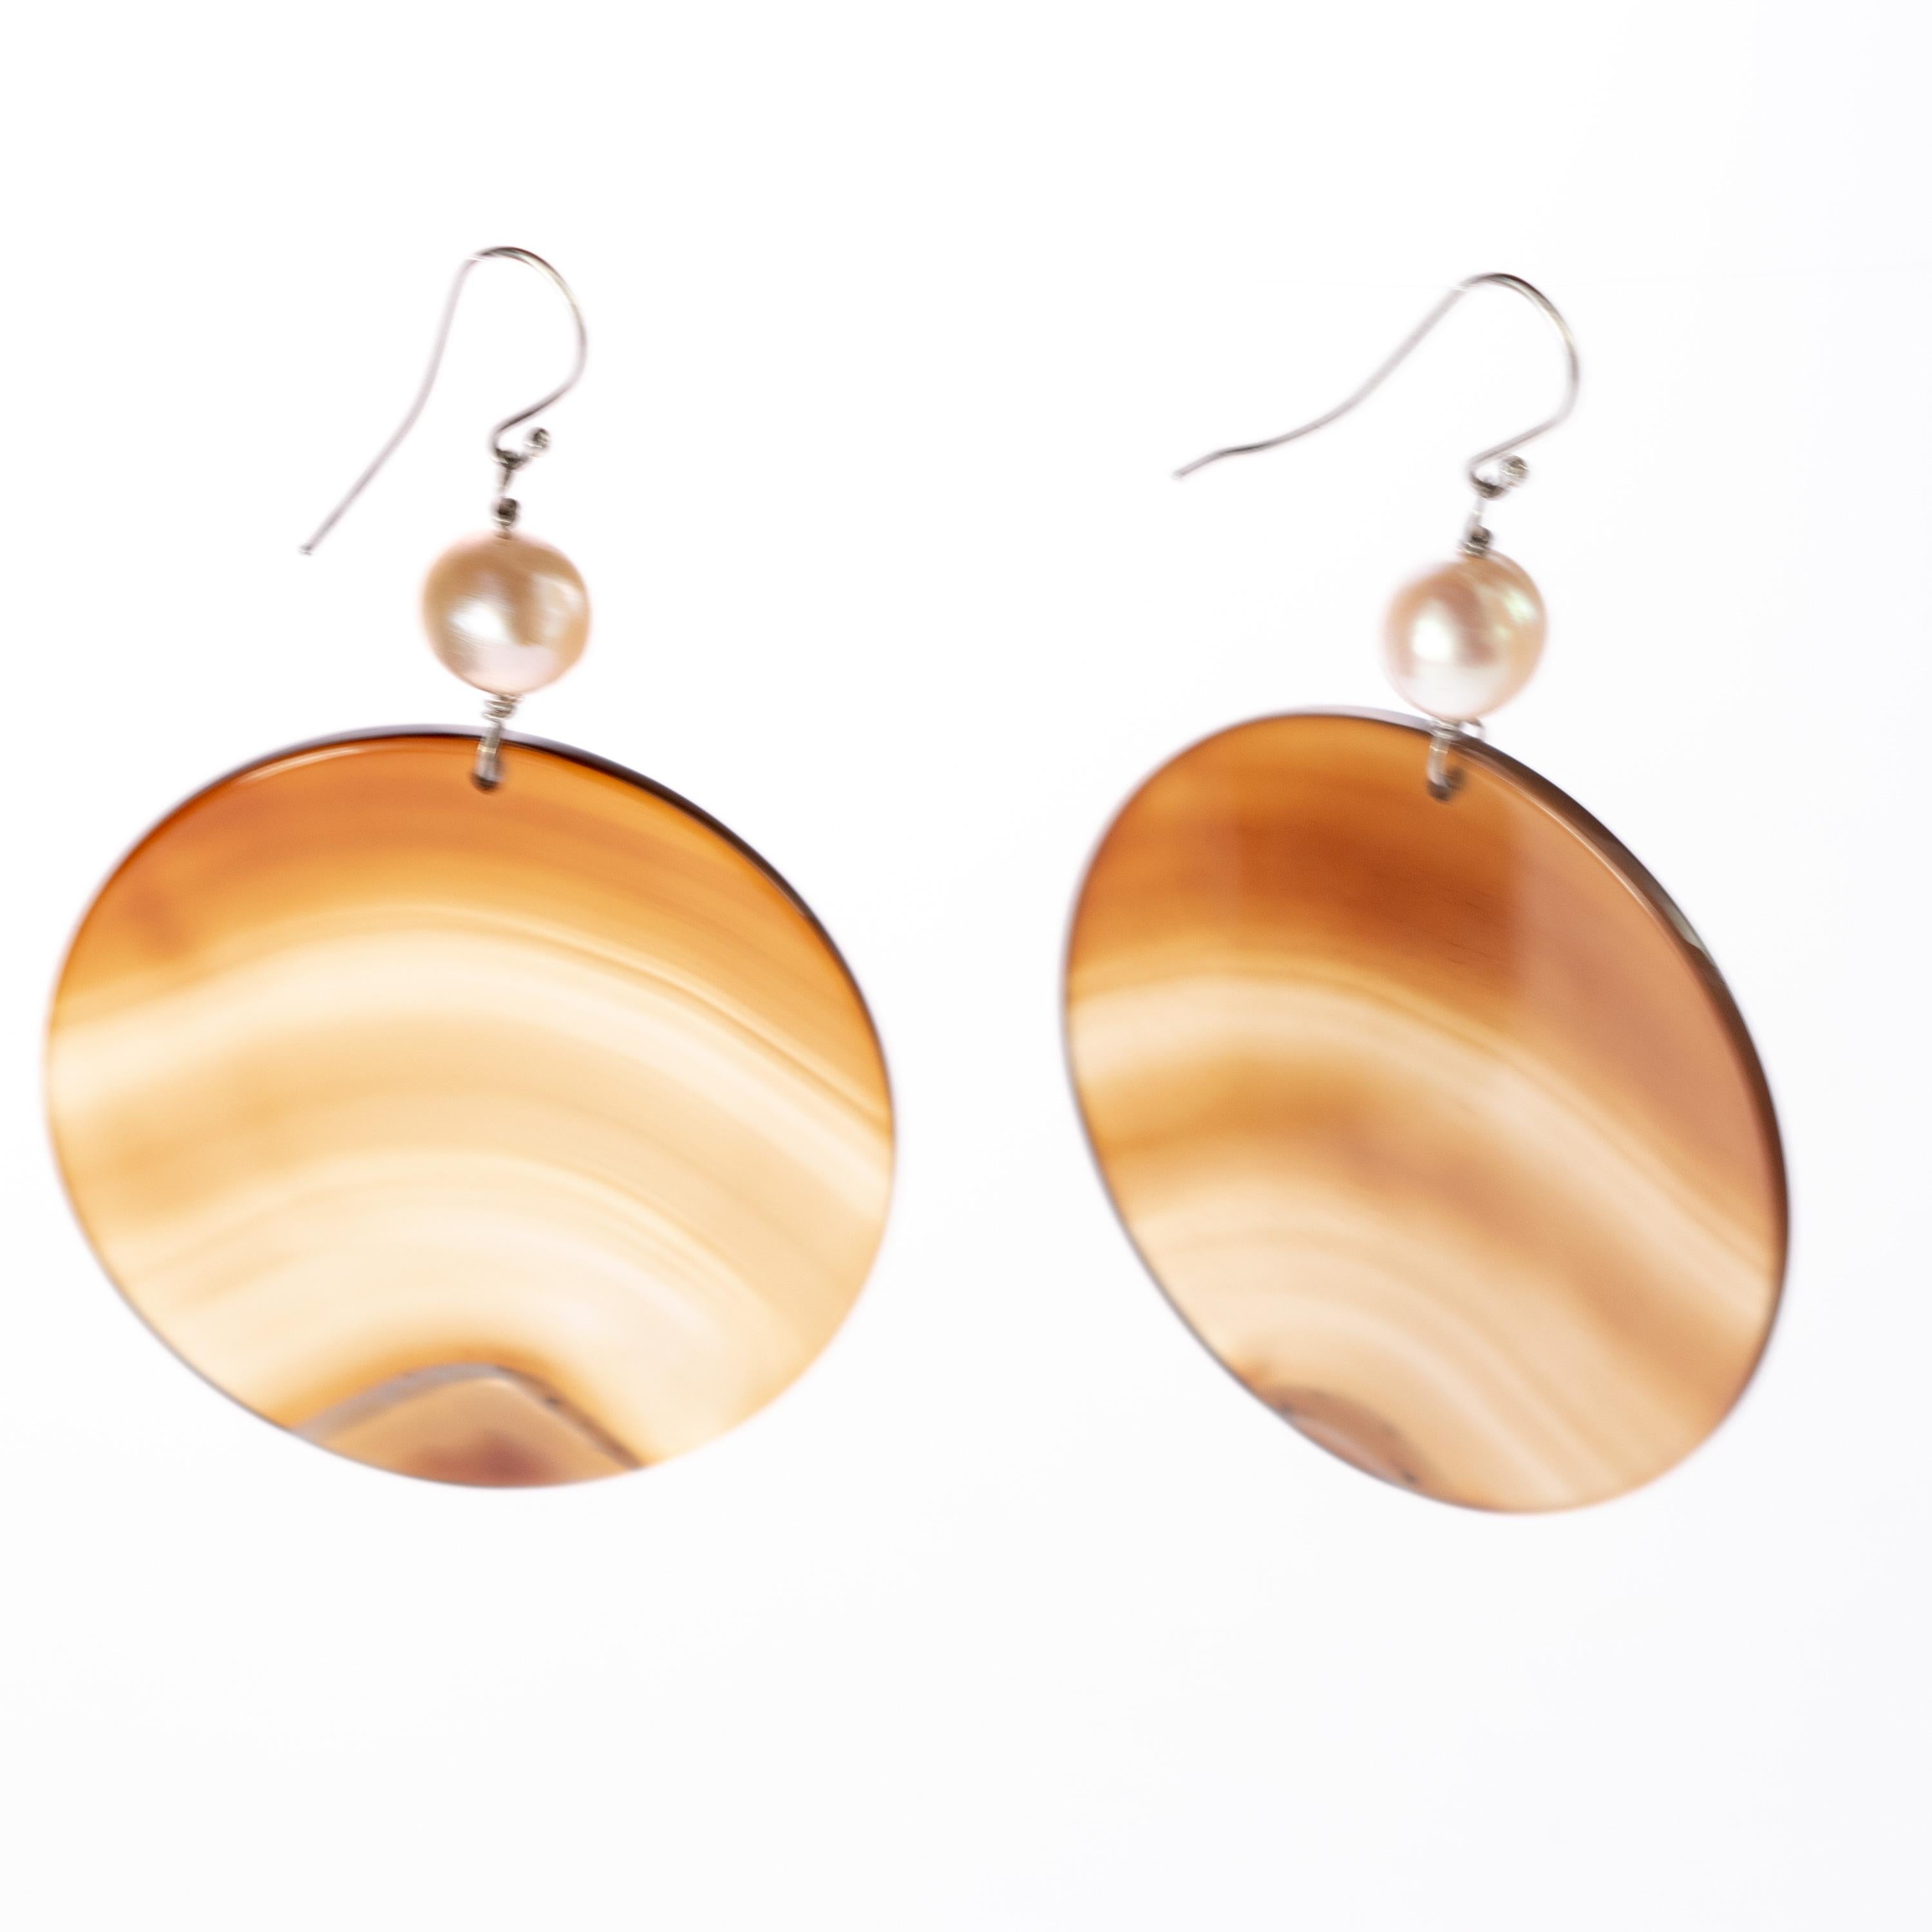 Circular brown agate with a sand-colored shade. A unique and modern piece designed with a vintage and elegant style. Dangle and long earrings with a delicate 925 sterling silver chain holding a round pearl.

Inspired in one of the world's natural